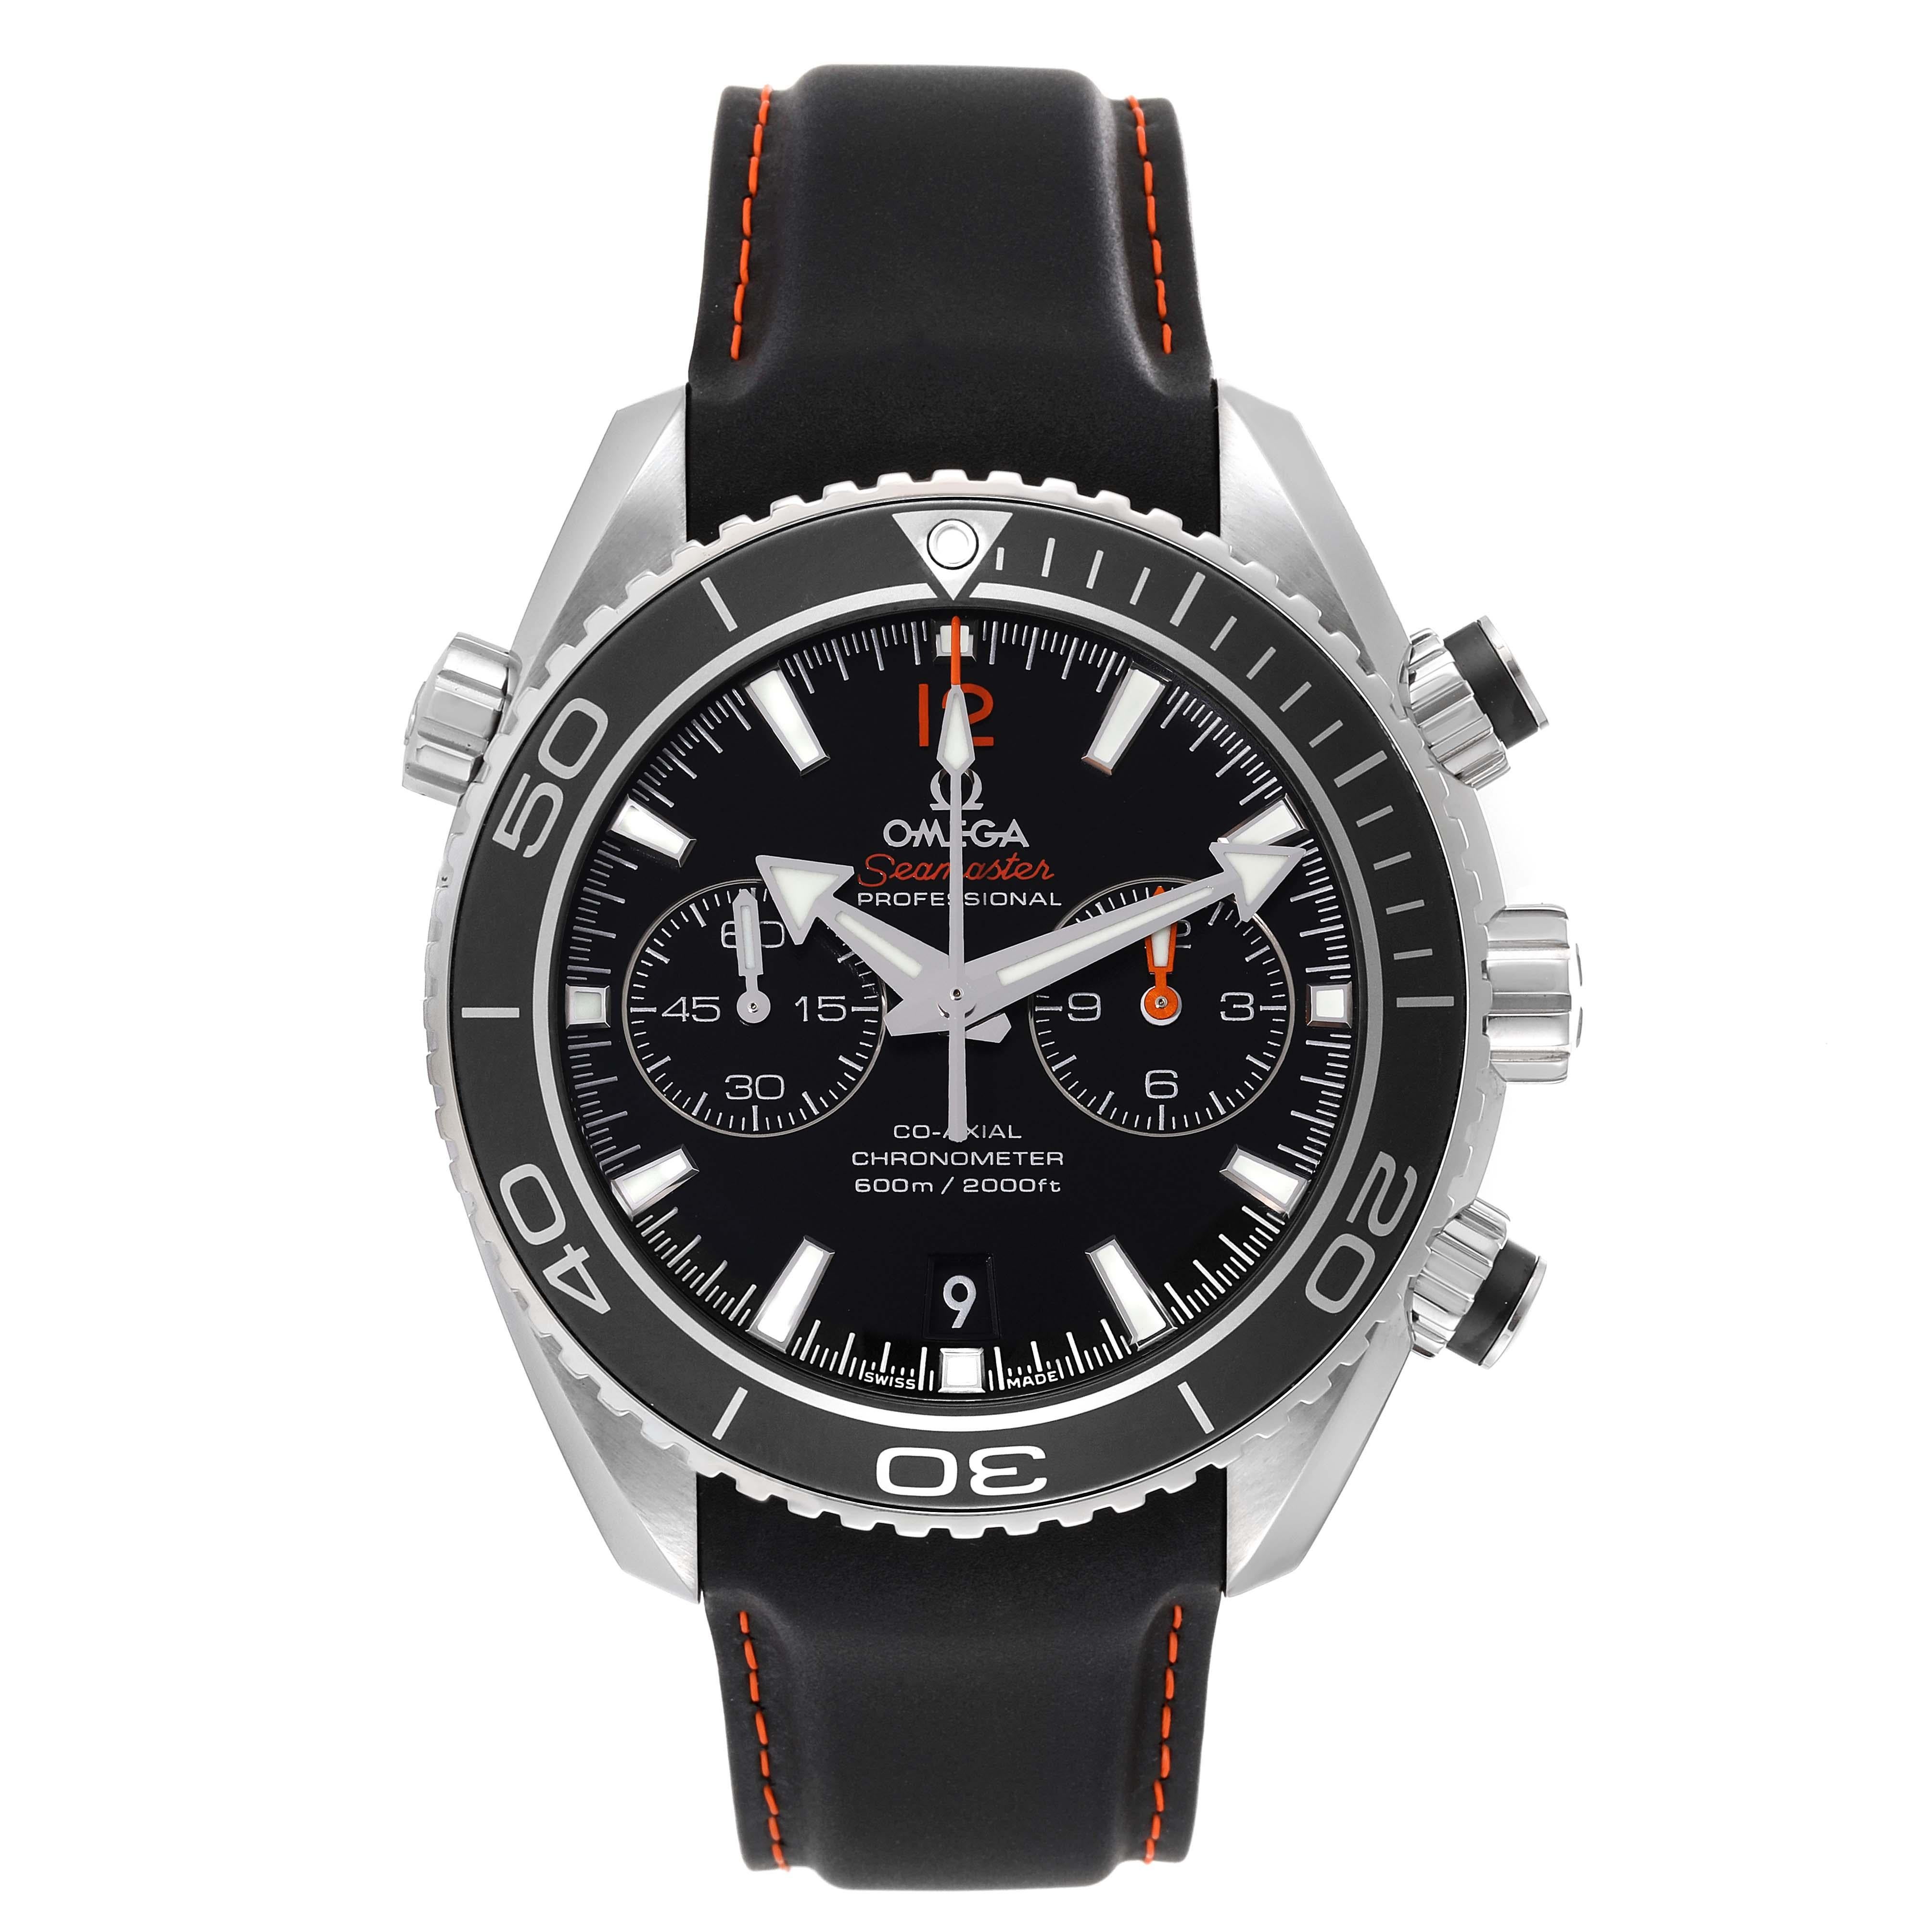 Omega Seamaster Planet Ocean Steel Mens Watch 232.32.46.51.01.005 Box Card. Automatic self-winding chronograph movement with column wheel mechanism and Co-Acial escapement. Stainless steel round case 45.5 mm in diameter. Helium Escapement Valve at